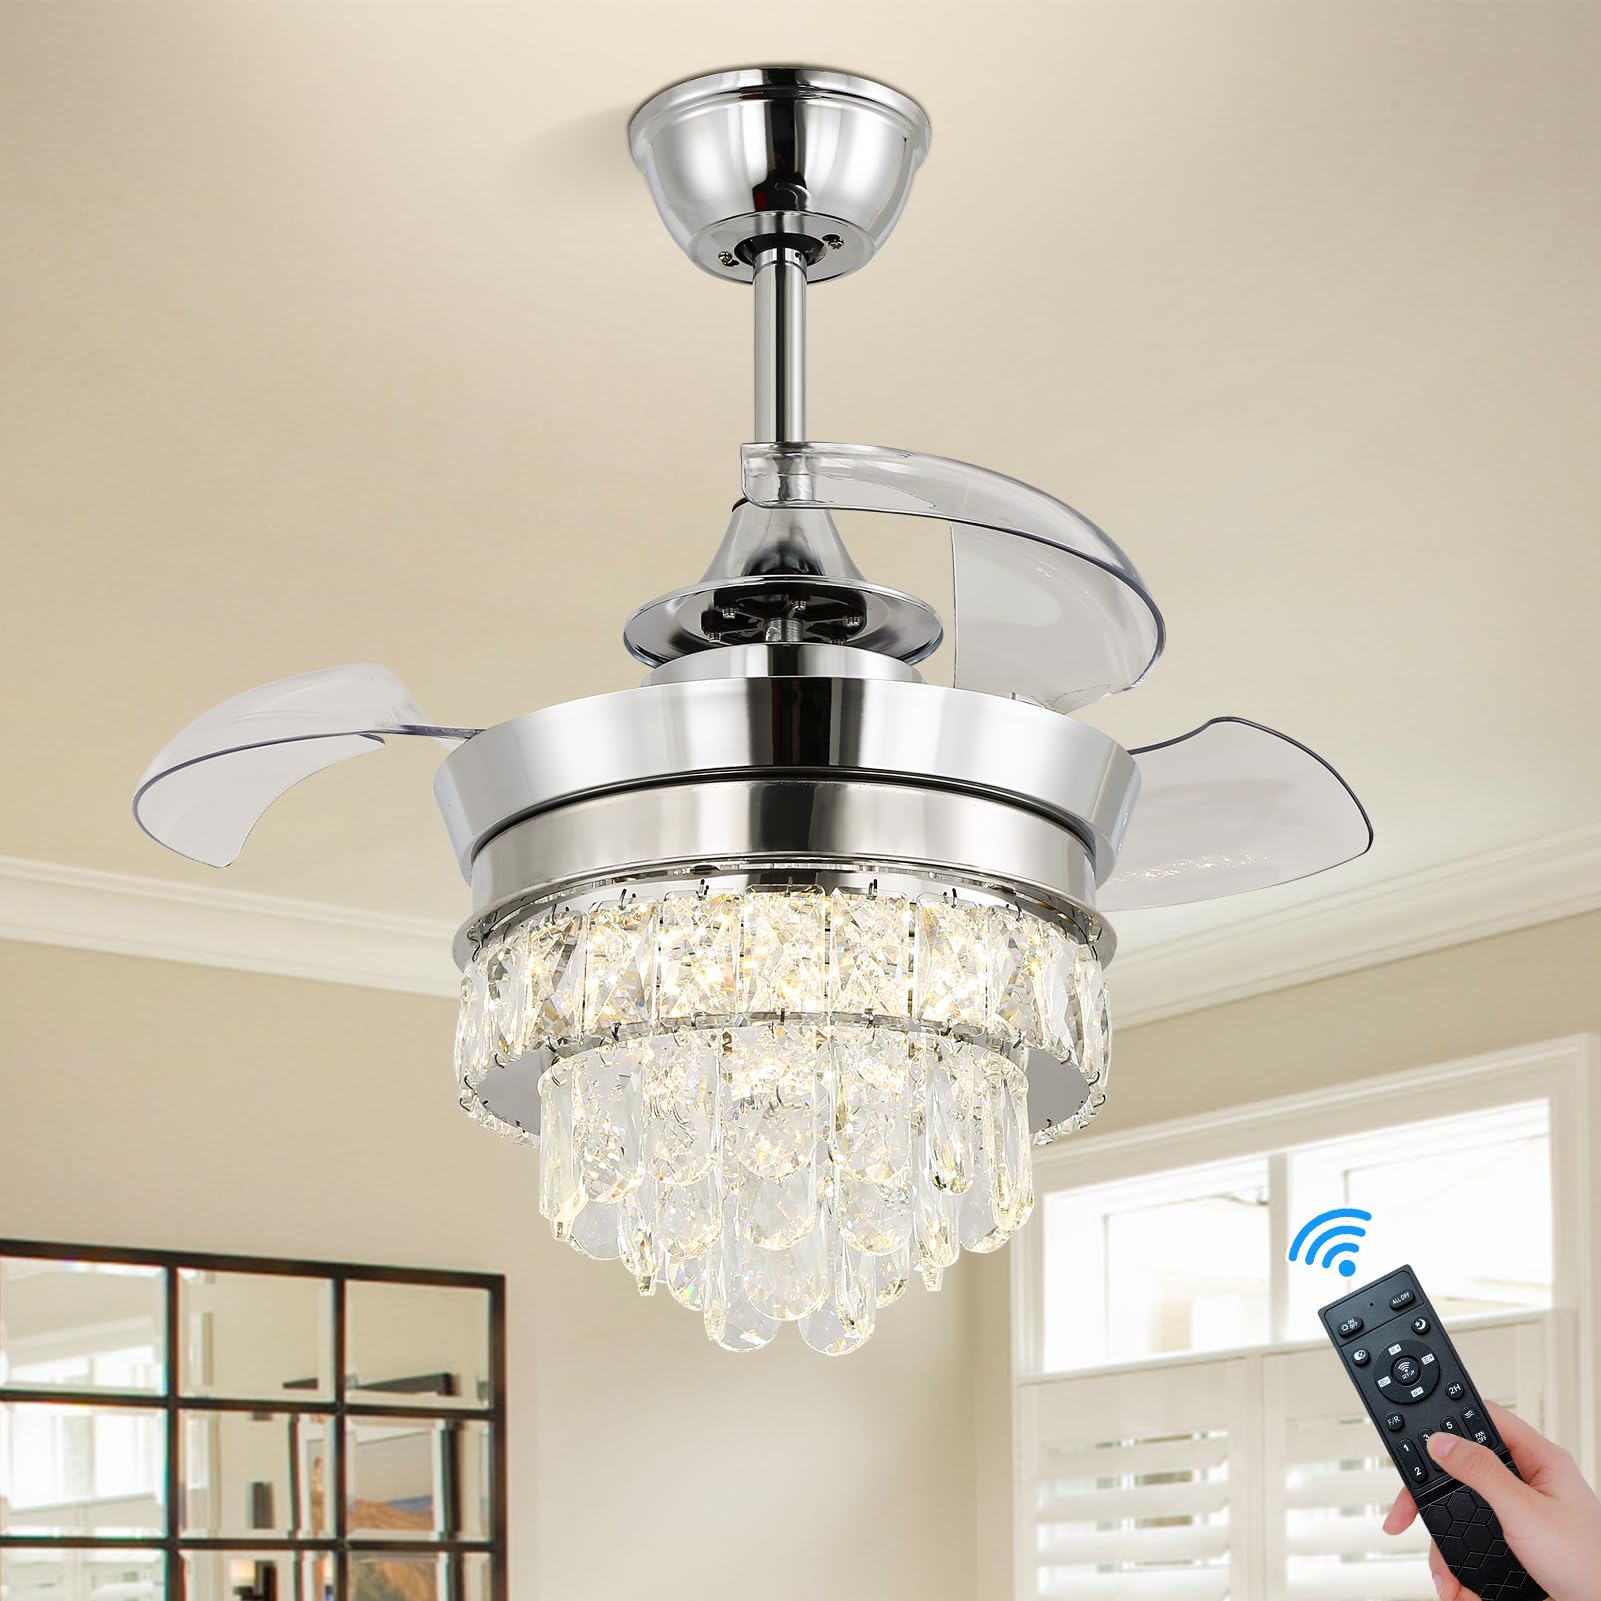 22" LED Crystal Ceiling Fan with Light Bedroom Small Fandeliers Dimmable 6 Speed Timing Chandeleir Fan with Lights for Bedroom Living Room (2202-Chrome)